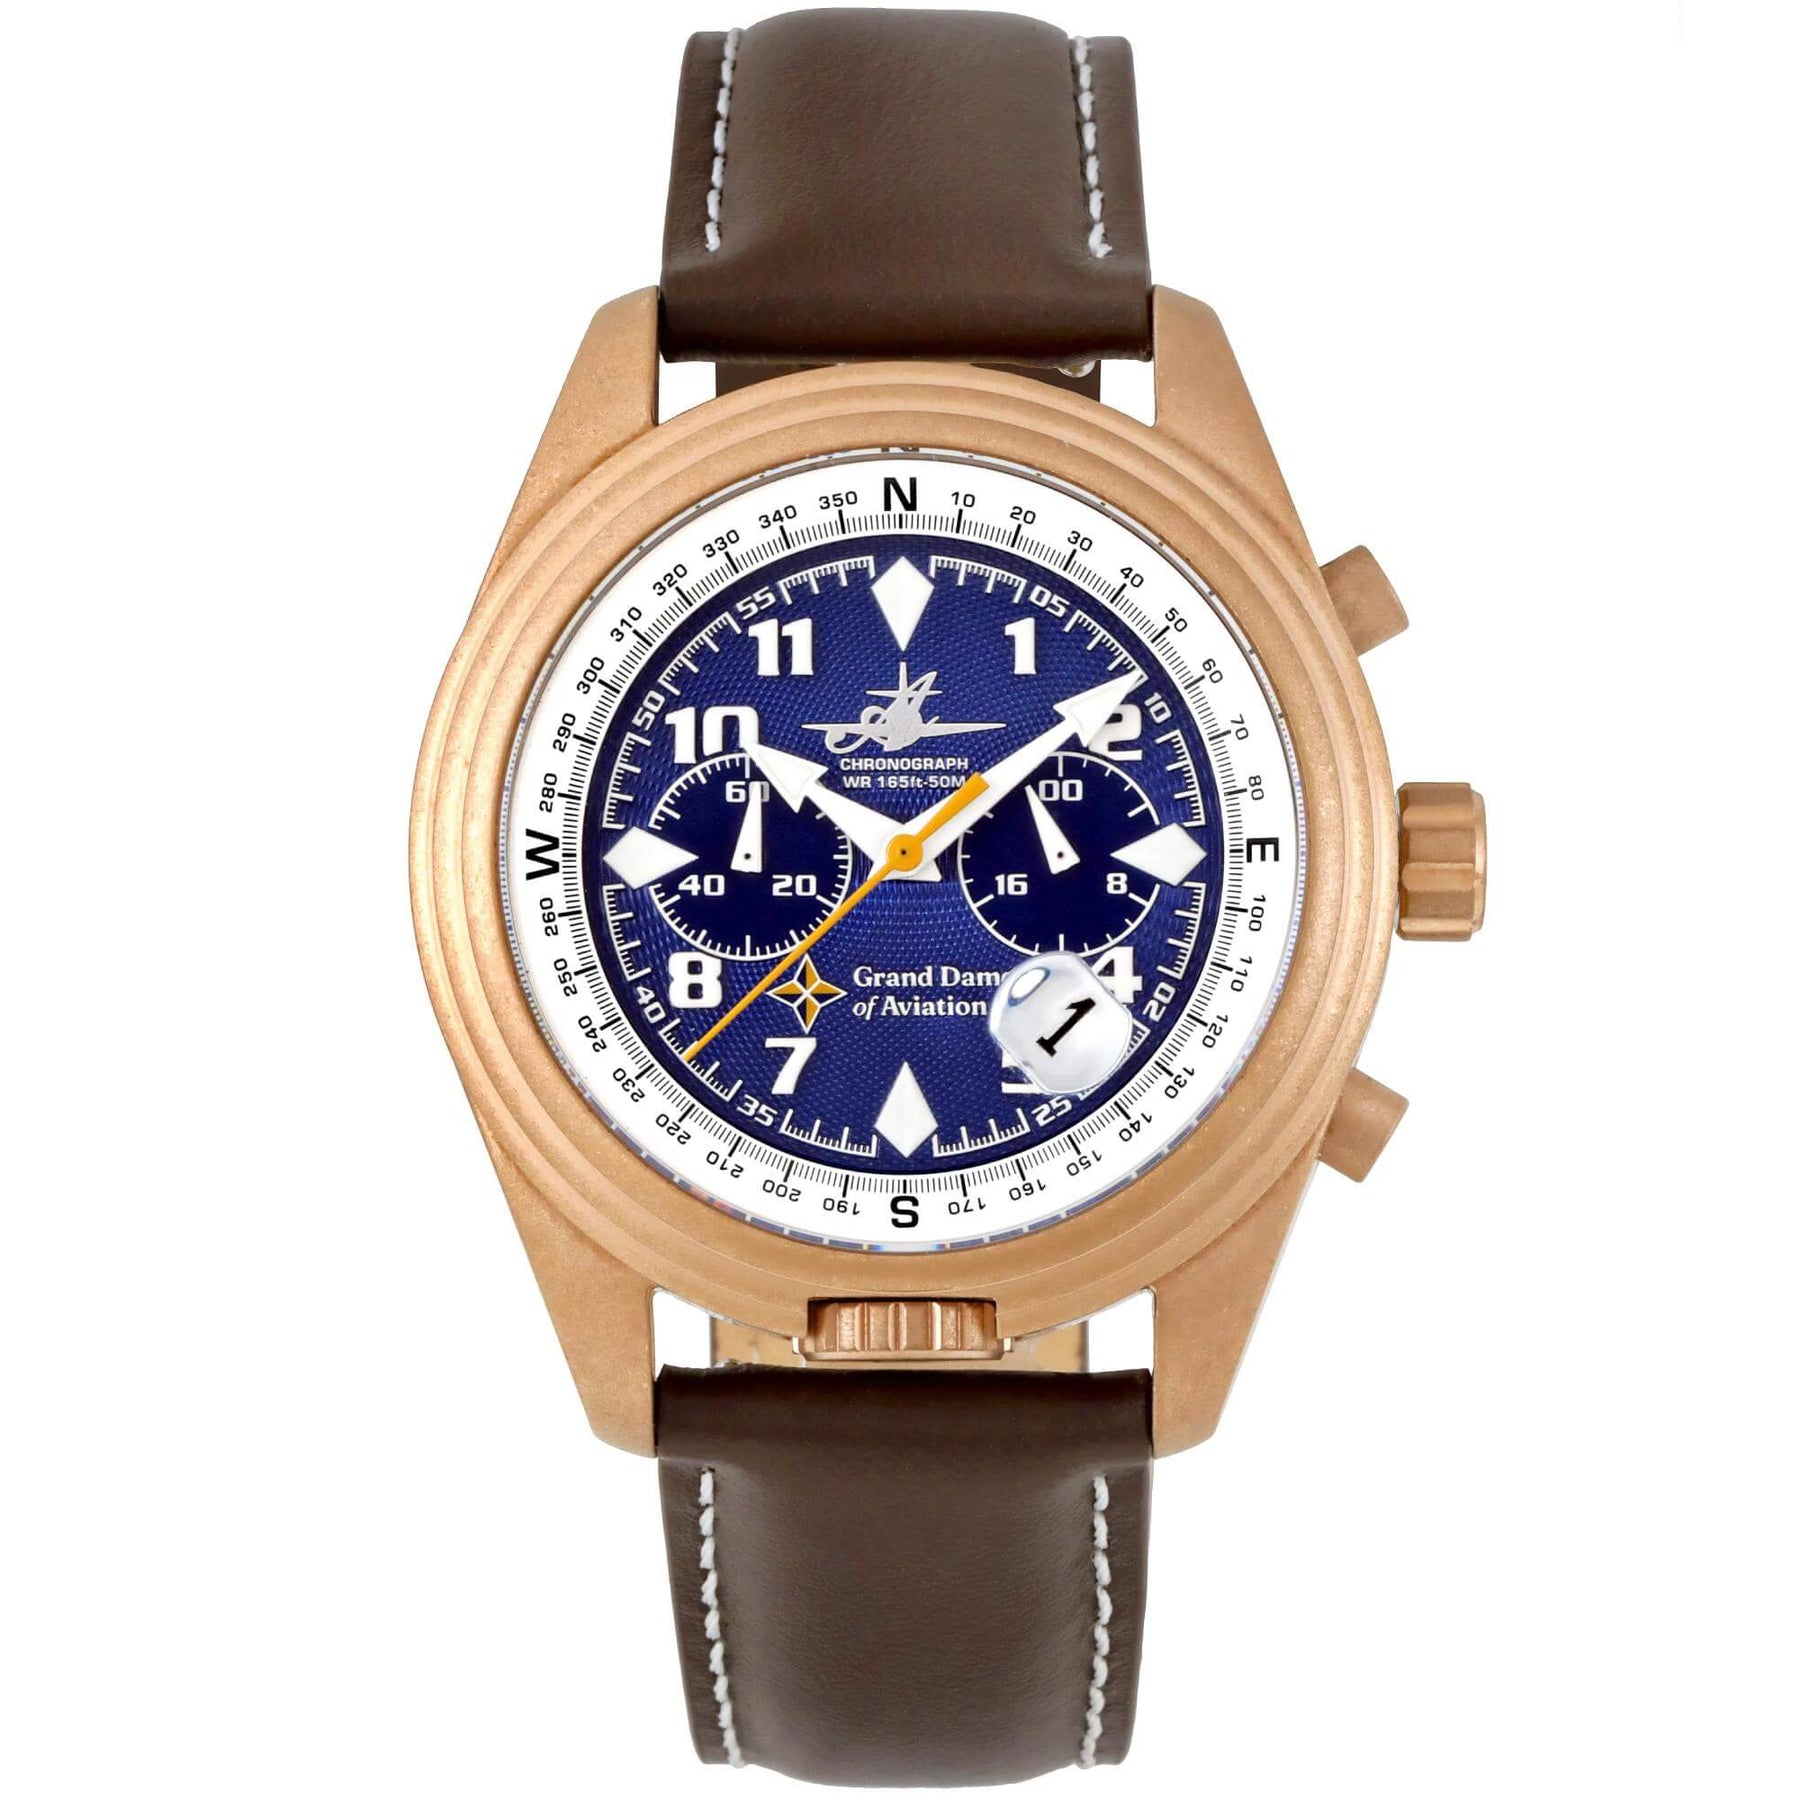 Grand Dames of Aviation Watch - The Abingdon Co.